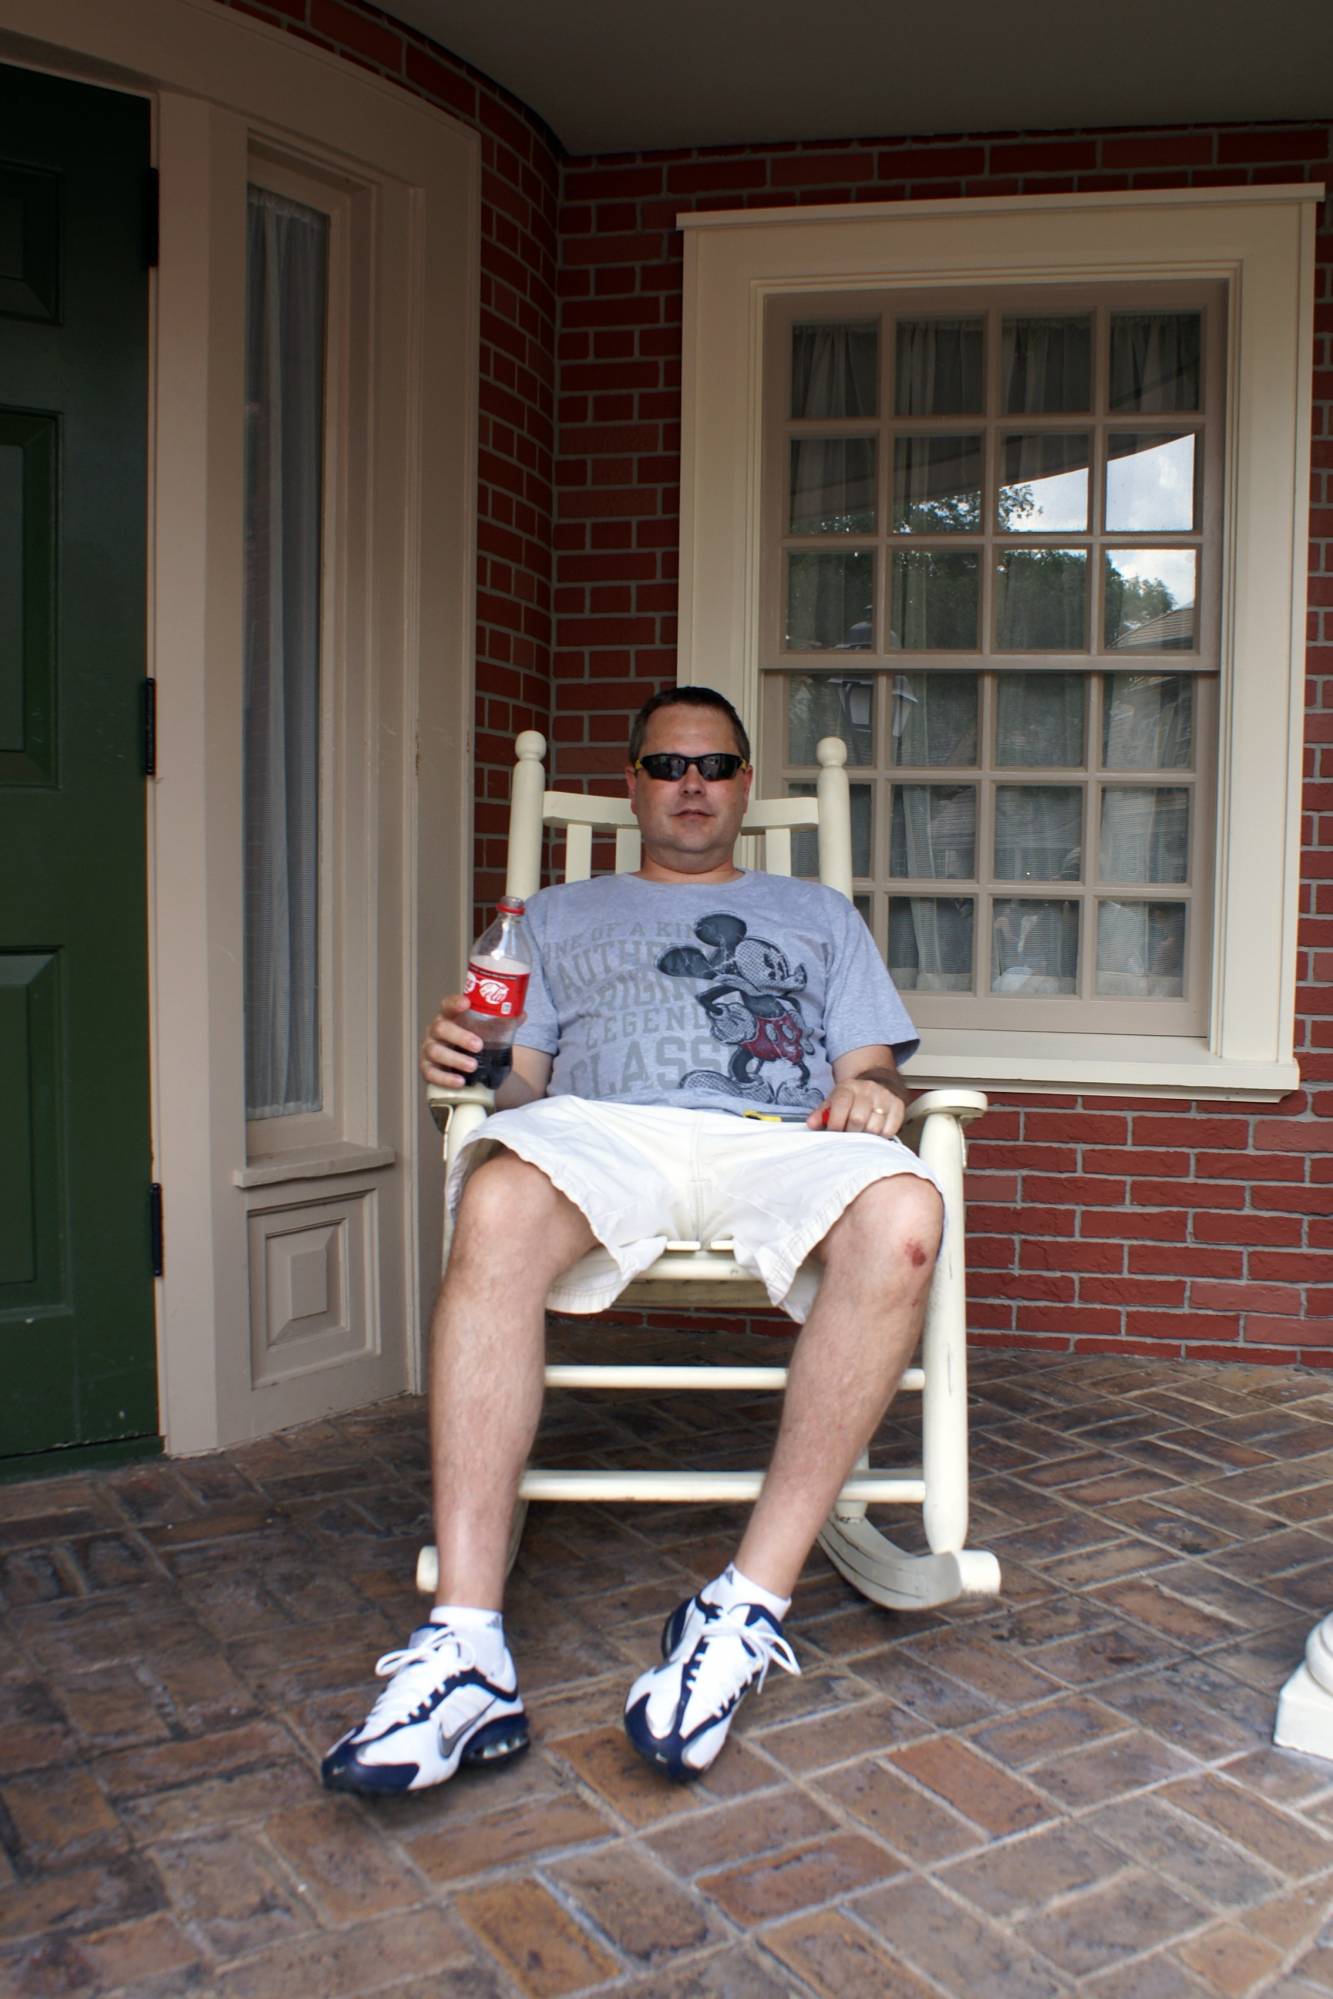 Sitting in a Rocker on the Porch